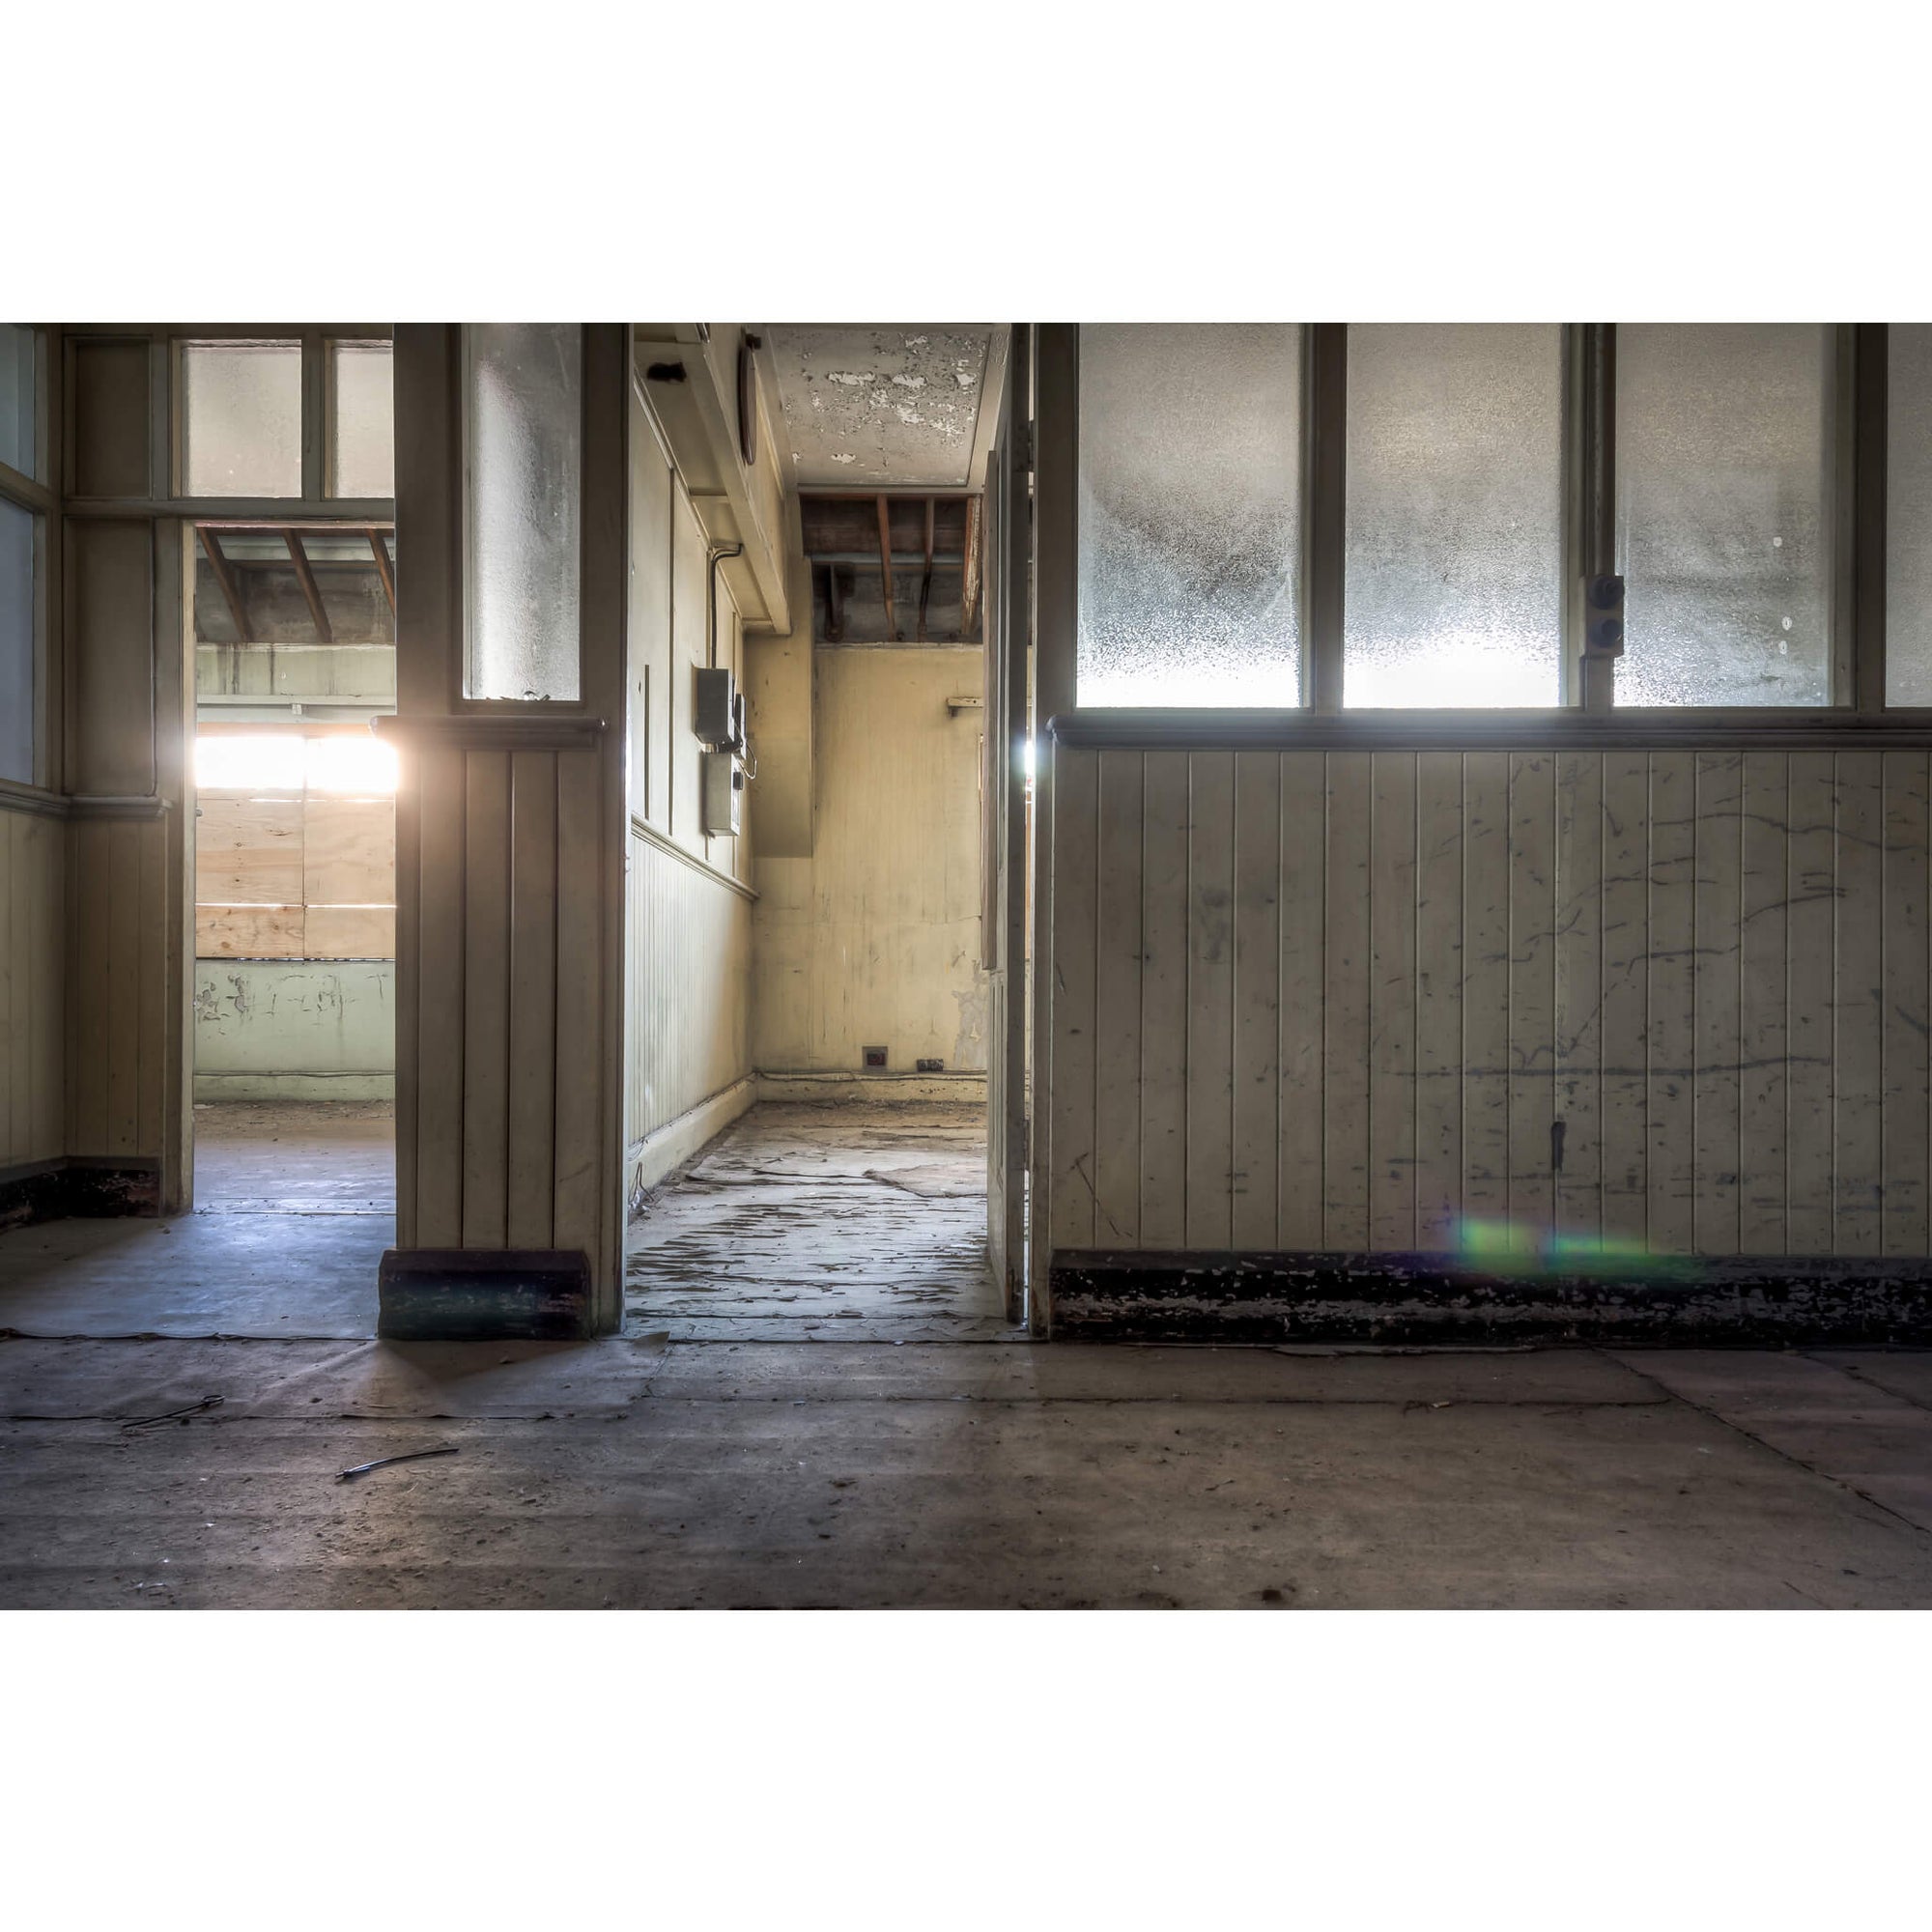 Offices | White Bay Power Station